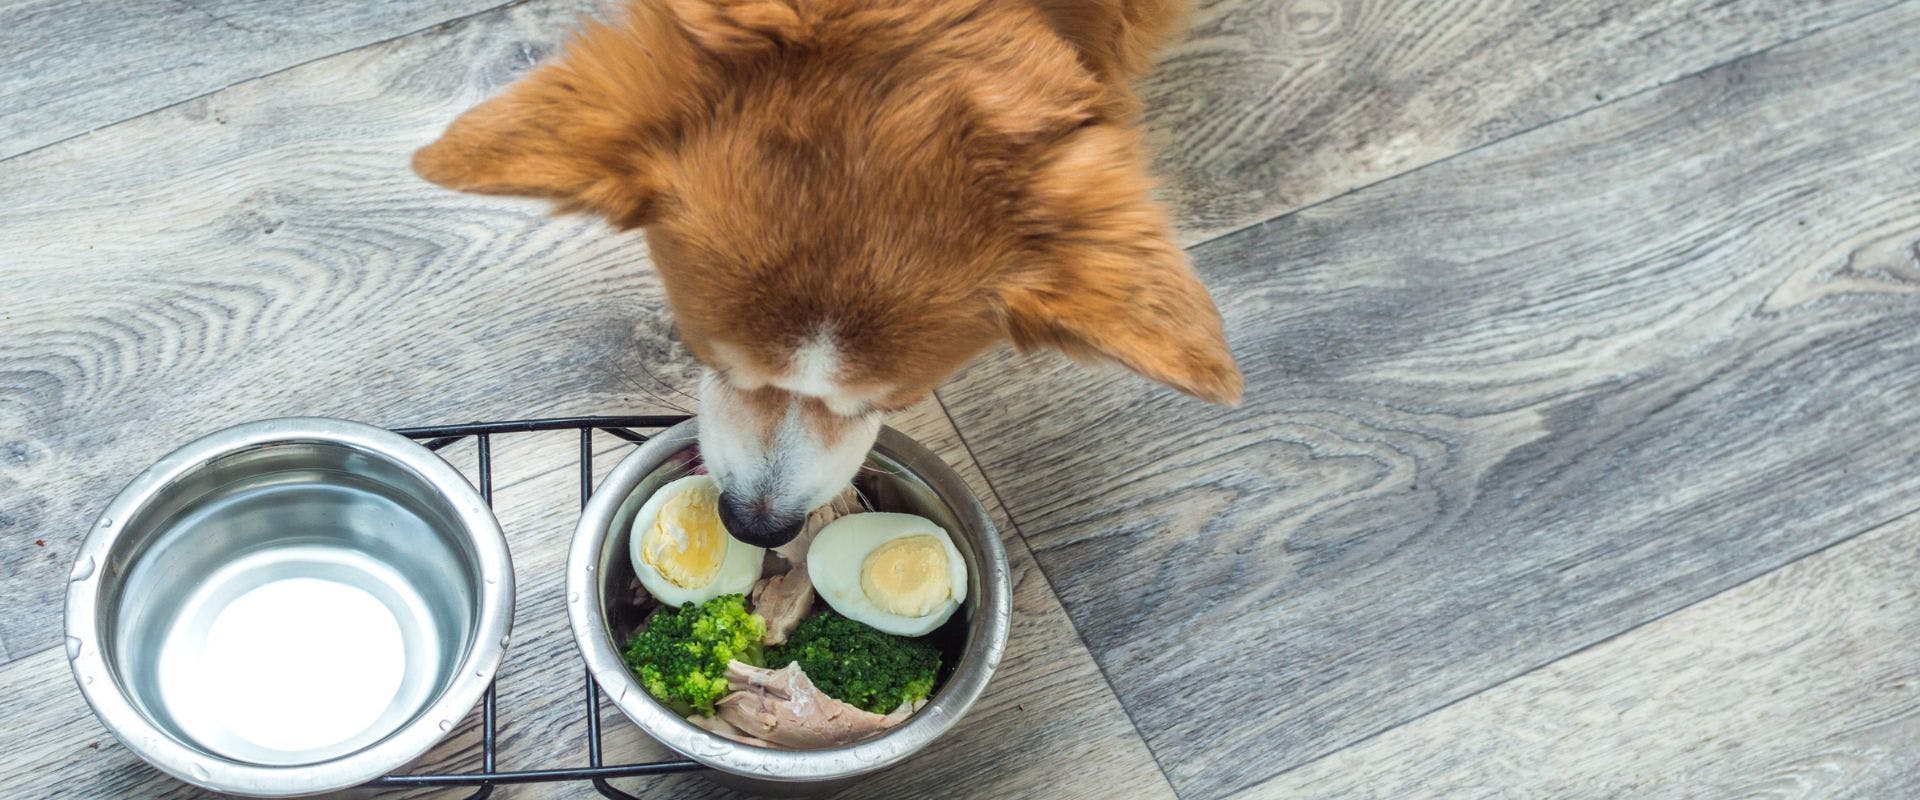 Dog eating boiled eggs from a dog bowl